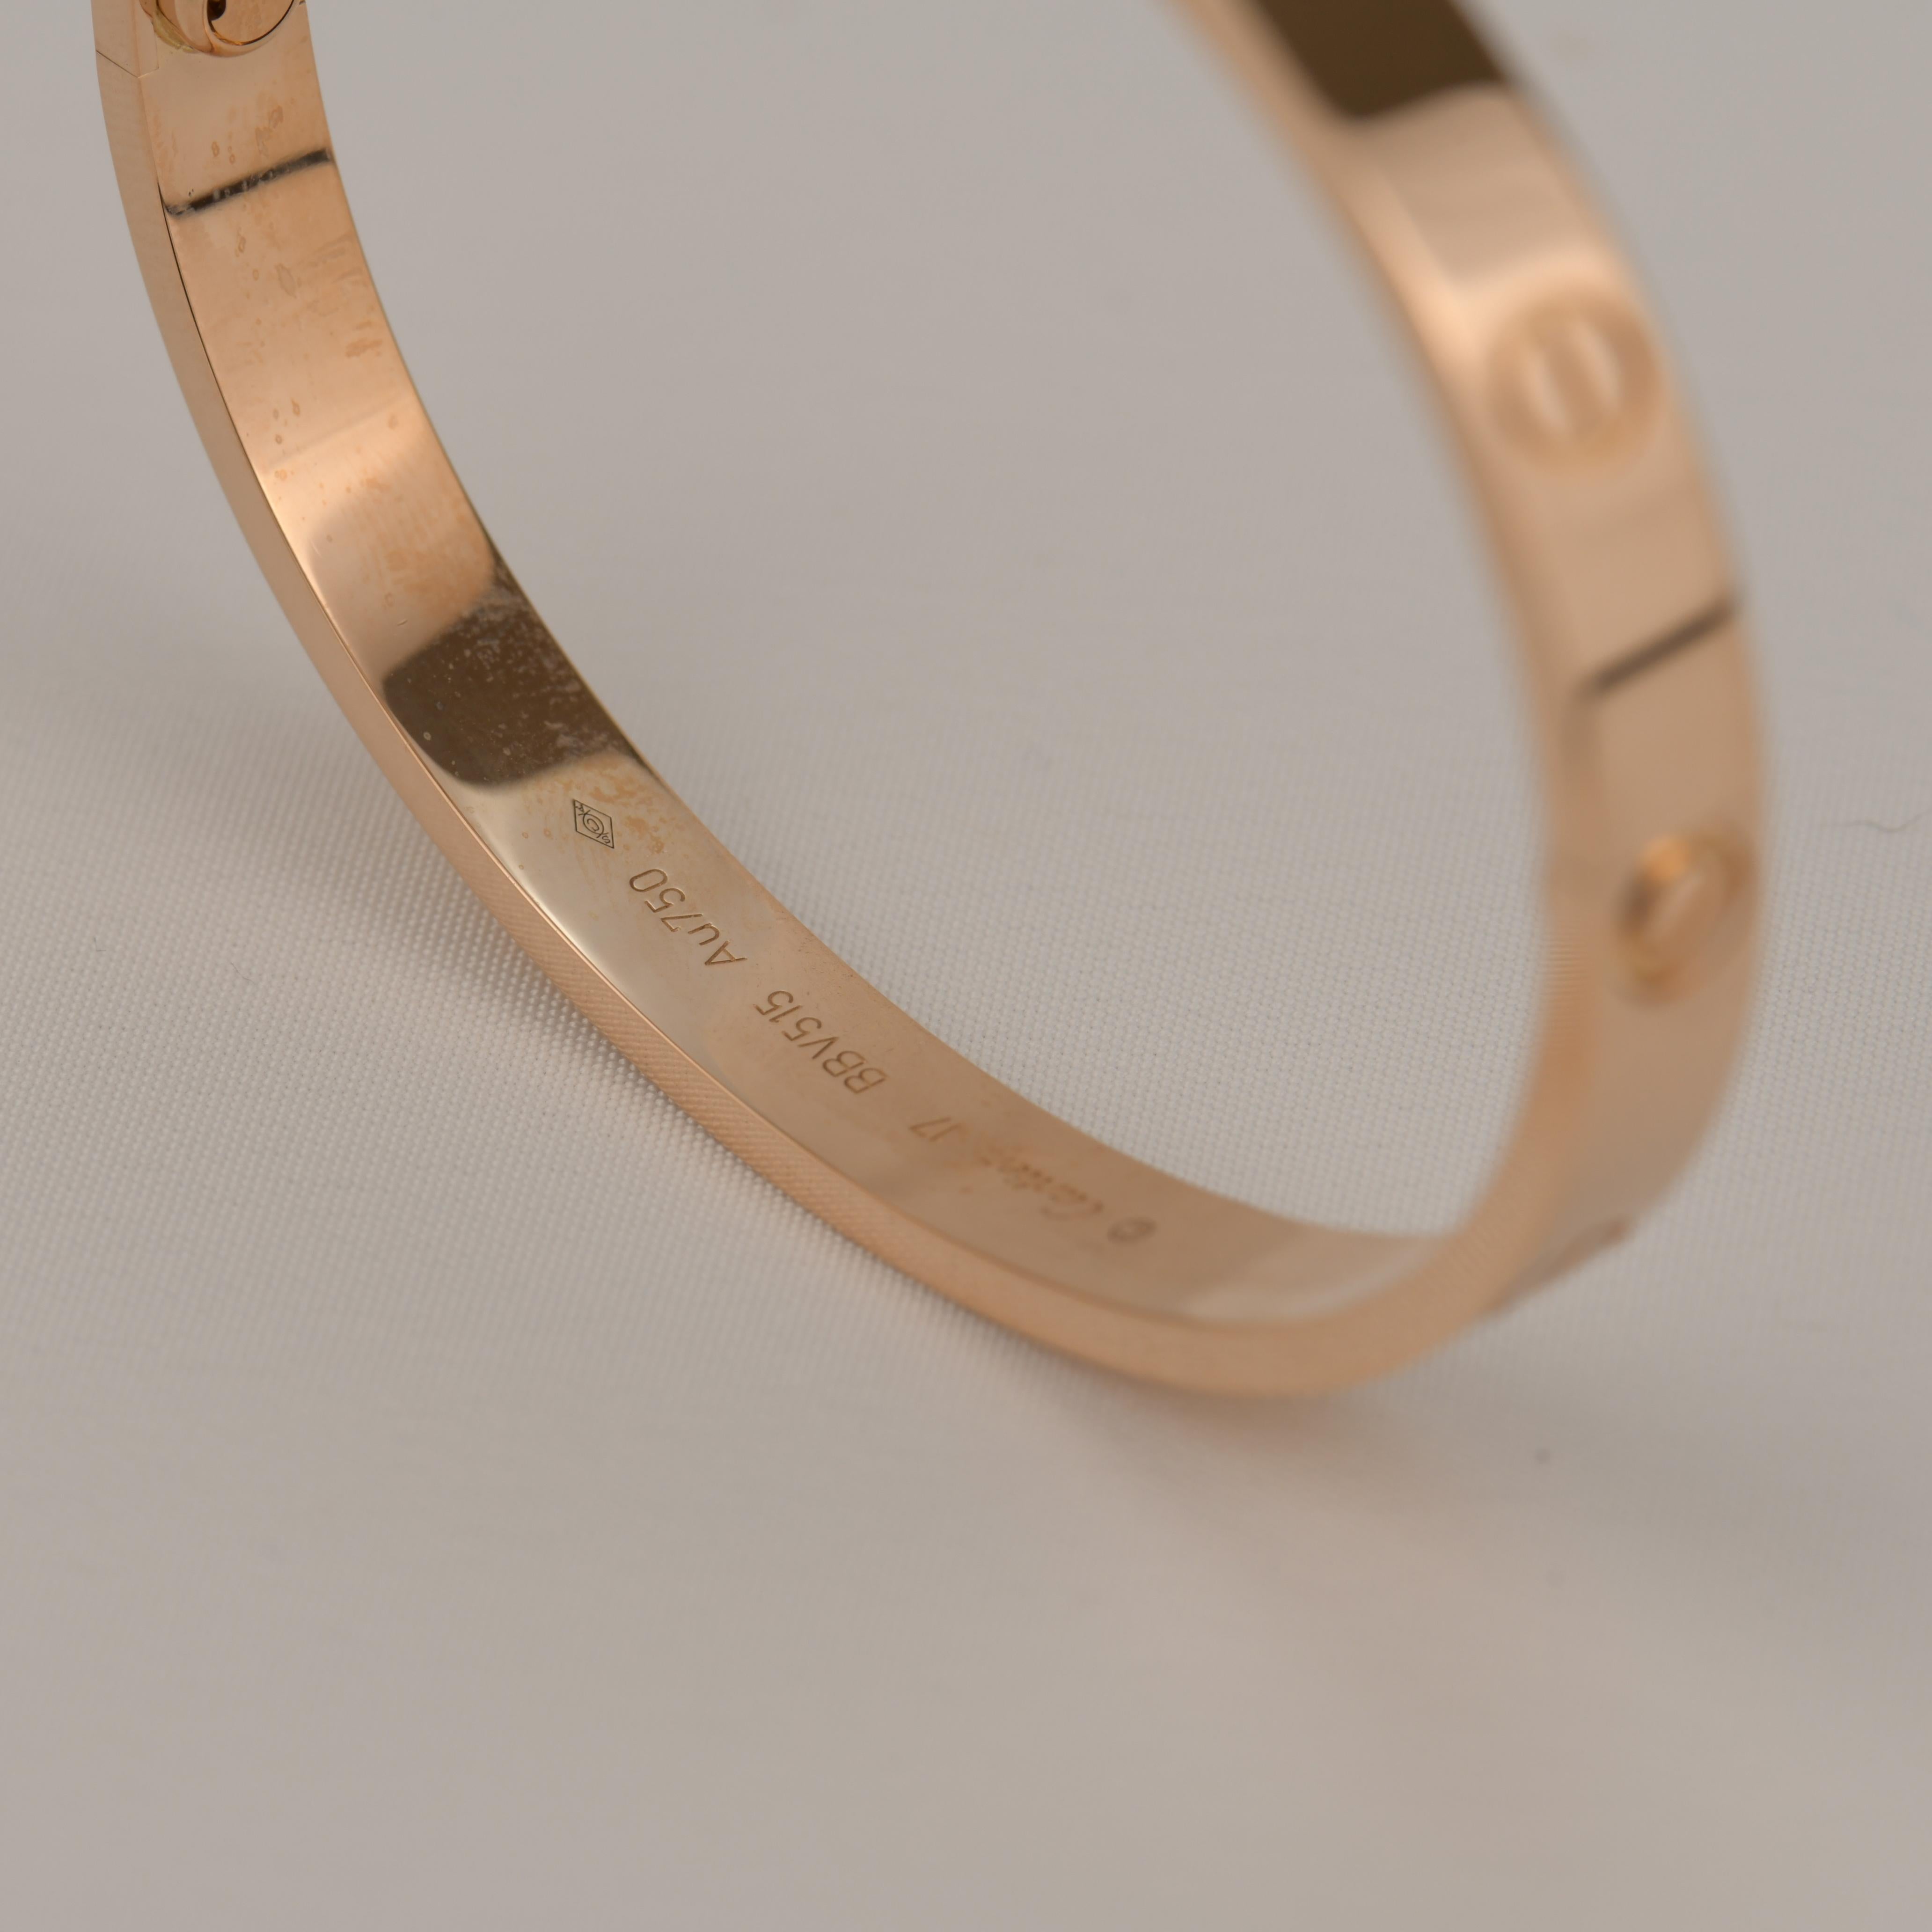 Cartier Love Rose Gold Bracelet B6035600 with Box and Paper 3